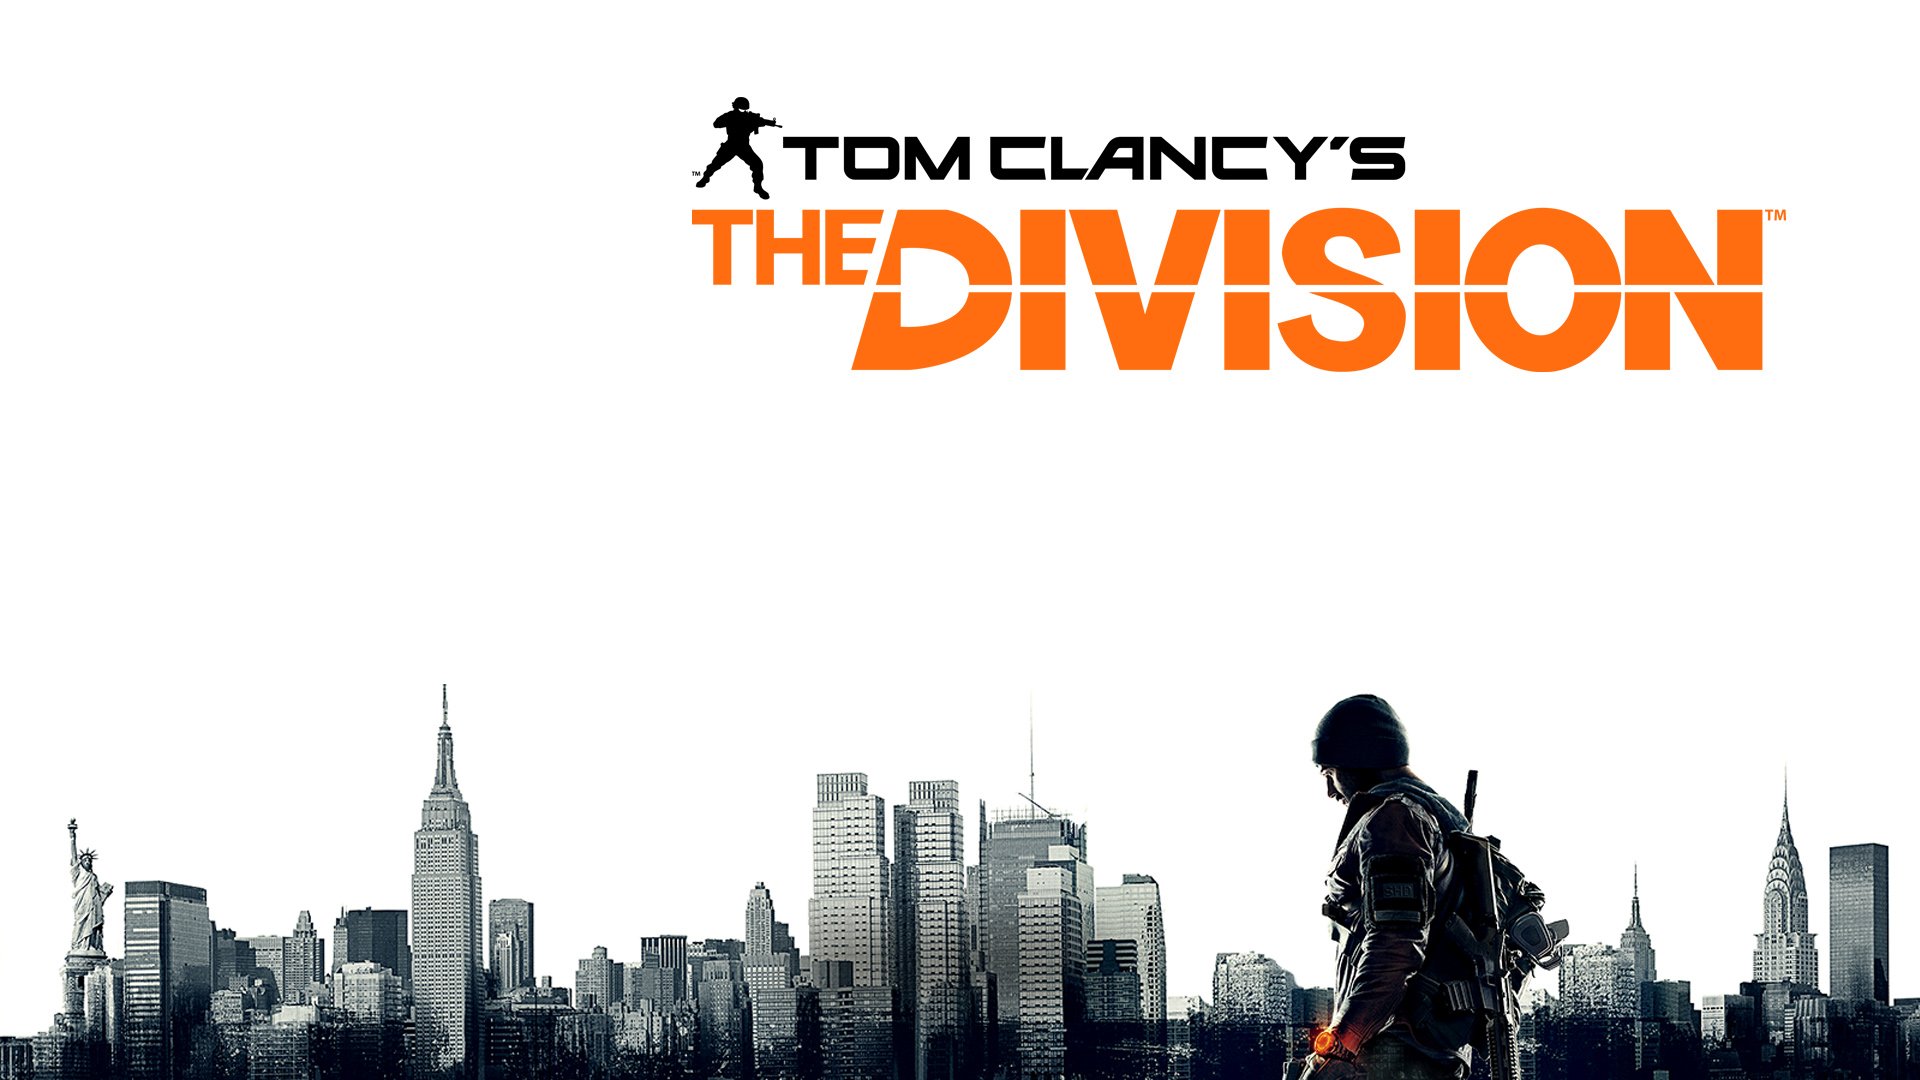 The Division Wallpaper Best